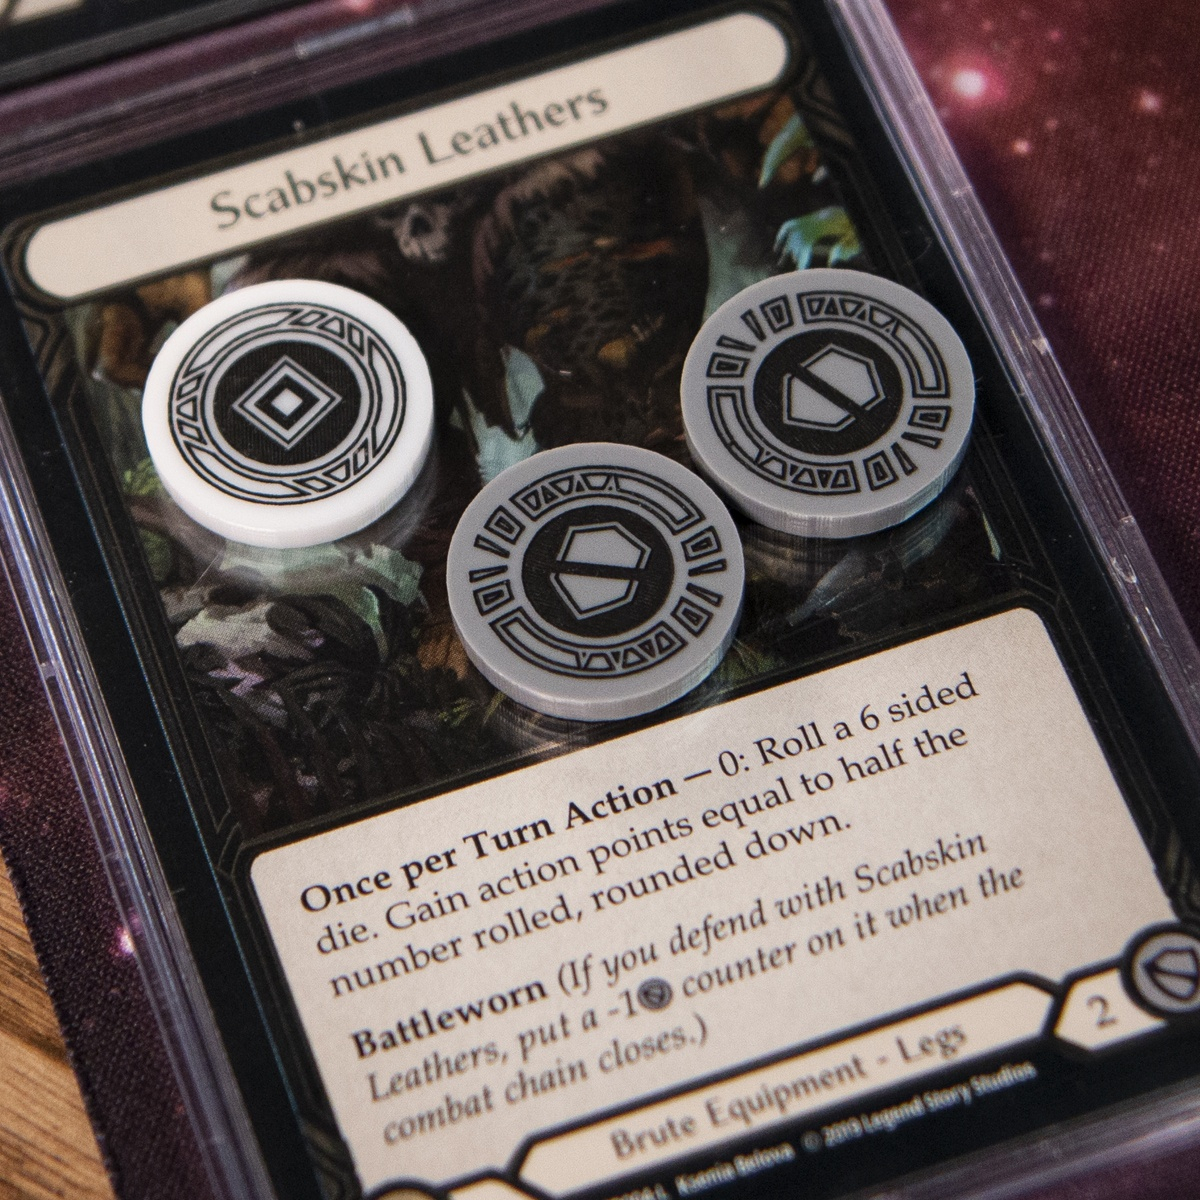 One Activation Token and two Armor Tokens on top of the Flesh and Blood TCG card, Scabskin Leathers